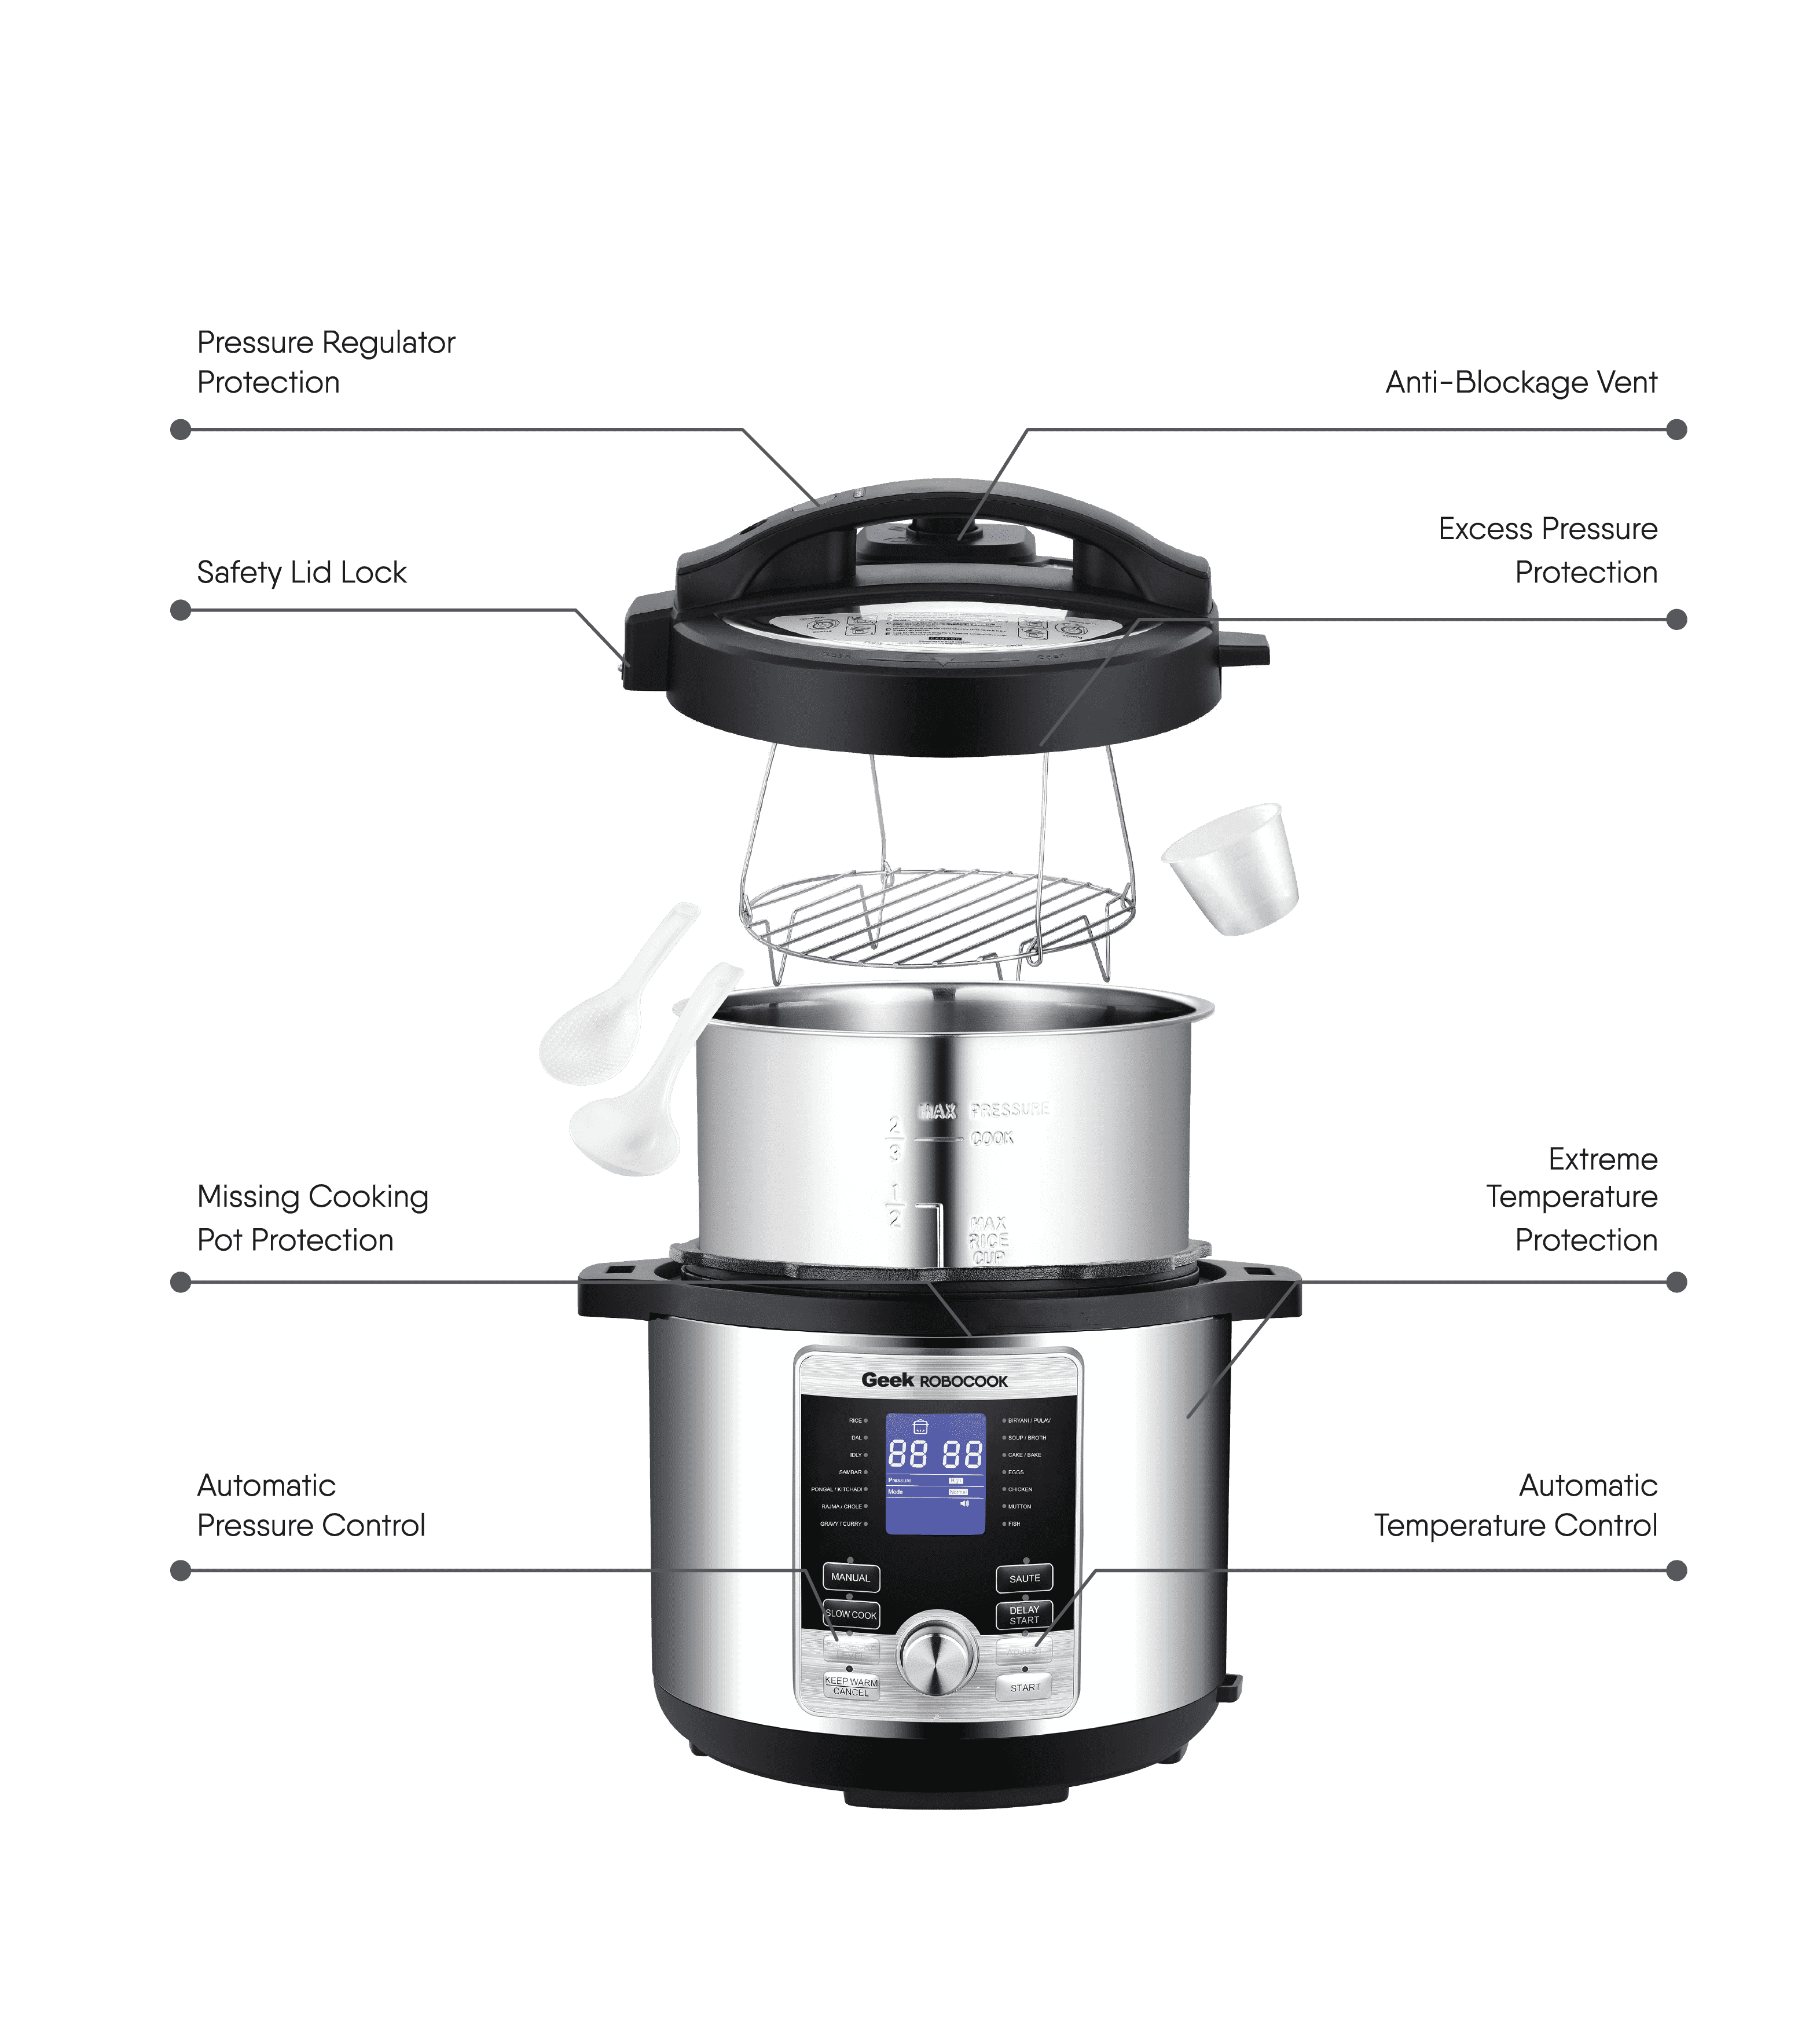 Features and parts of Geek Robocook Digi Automatic Electric Pressure cooker 